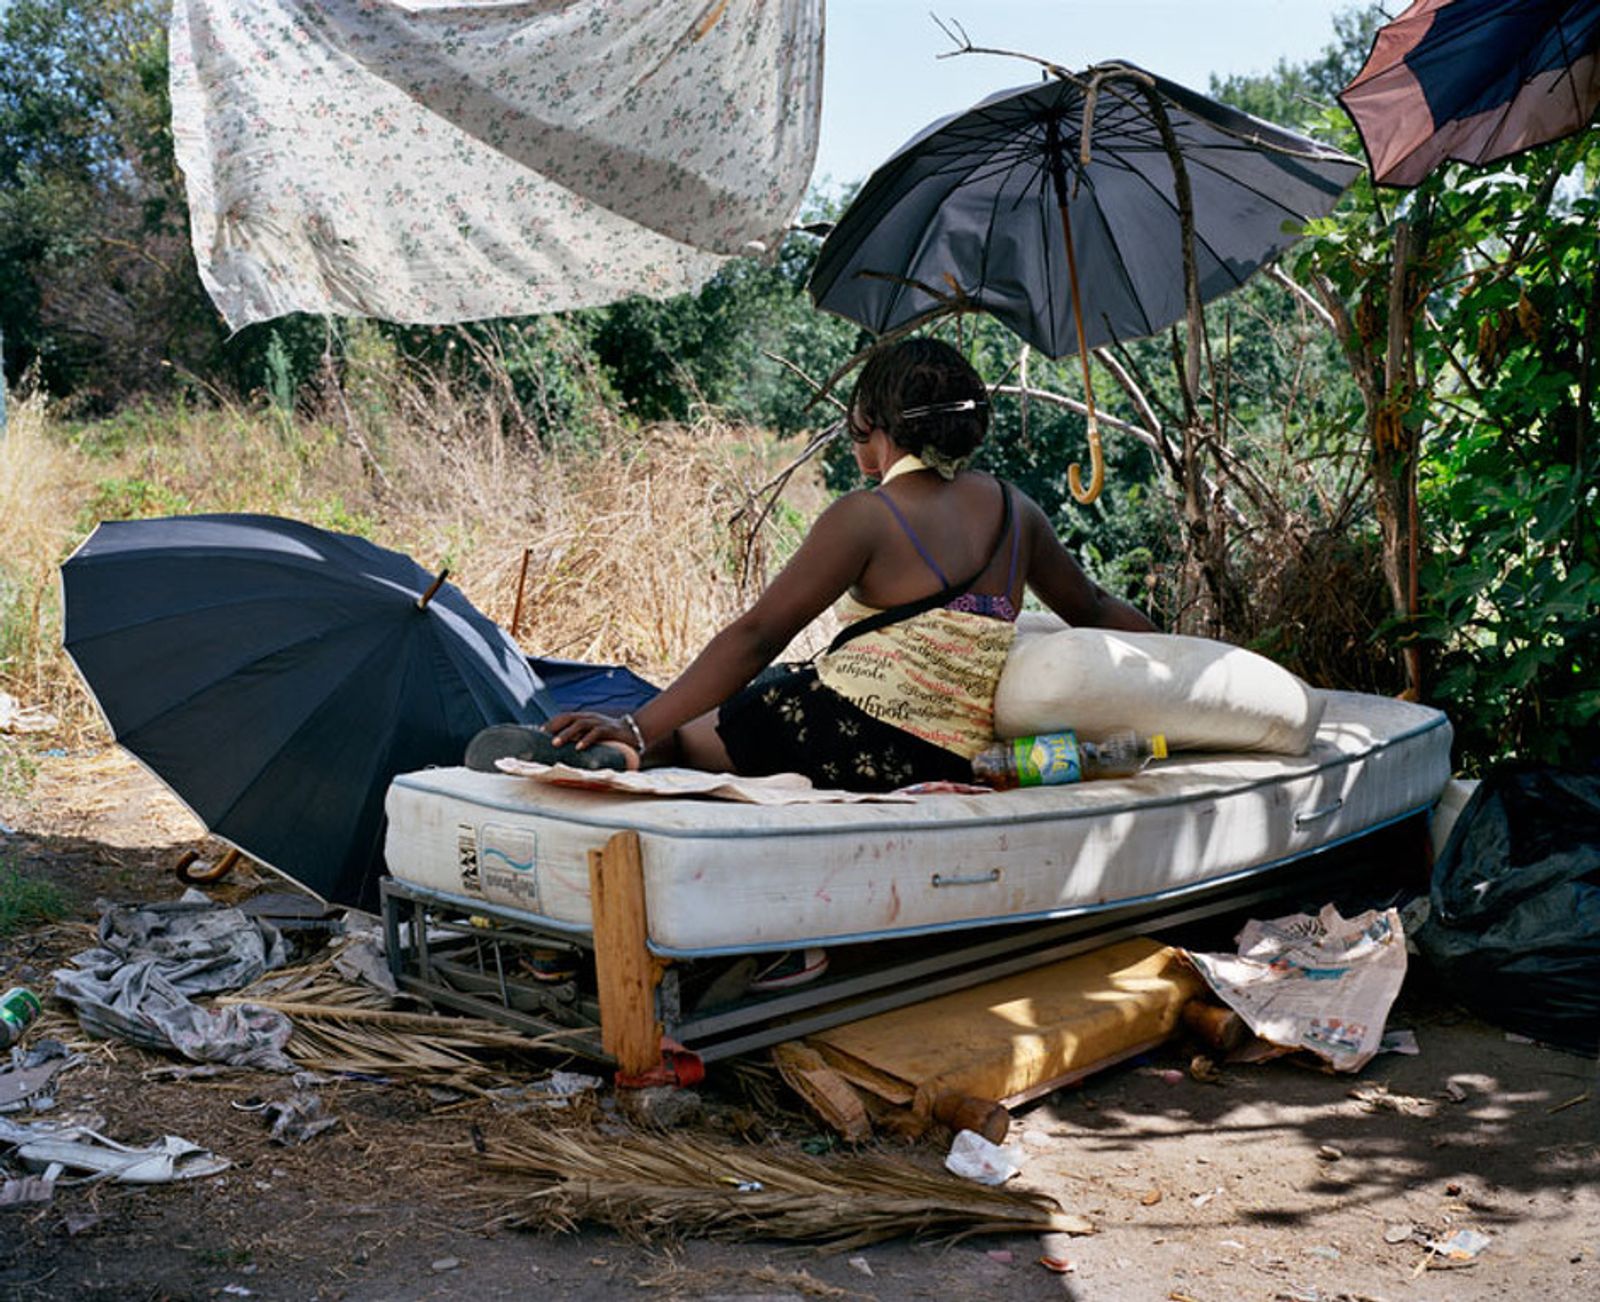 © Paolo Patrizi - Sharon, a sex worker, on her makeshift bed, Rome, Italy